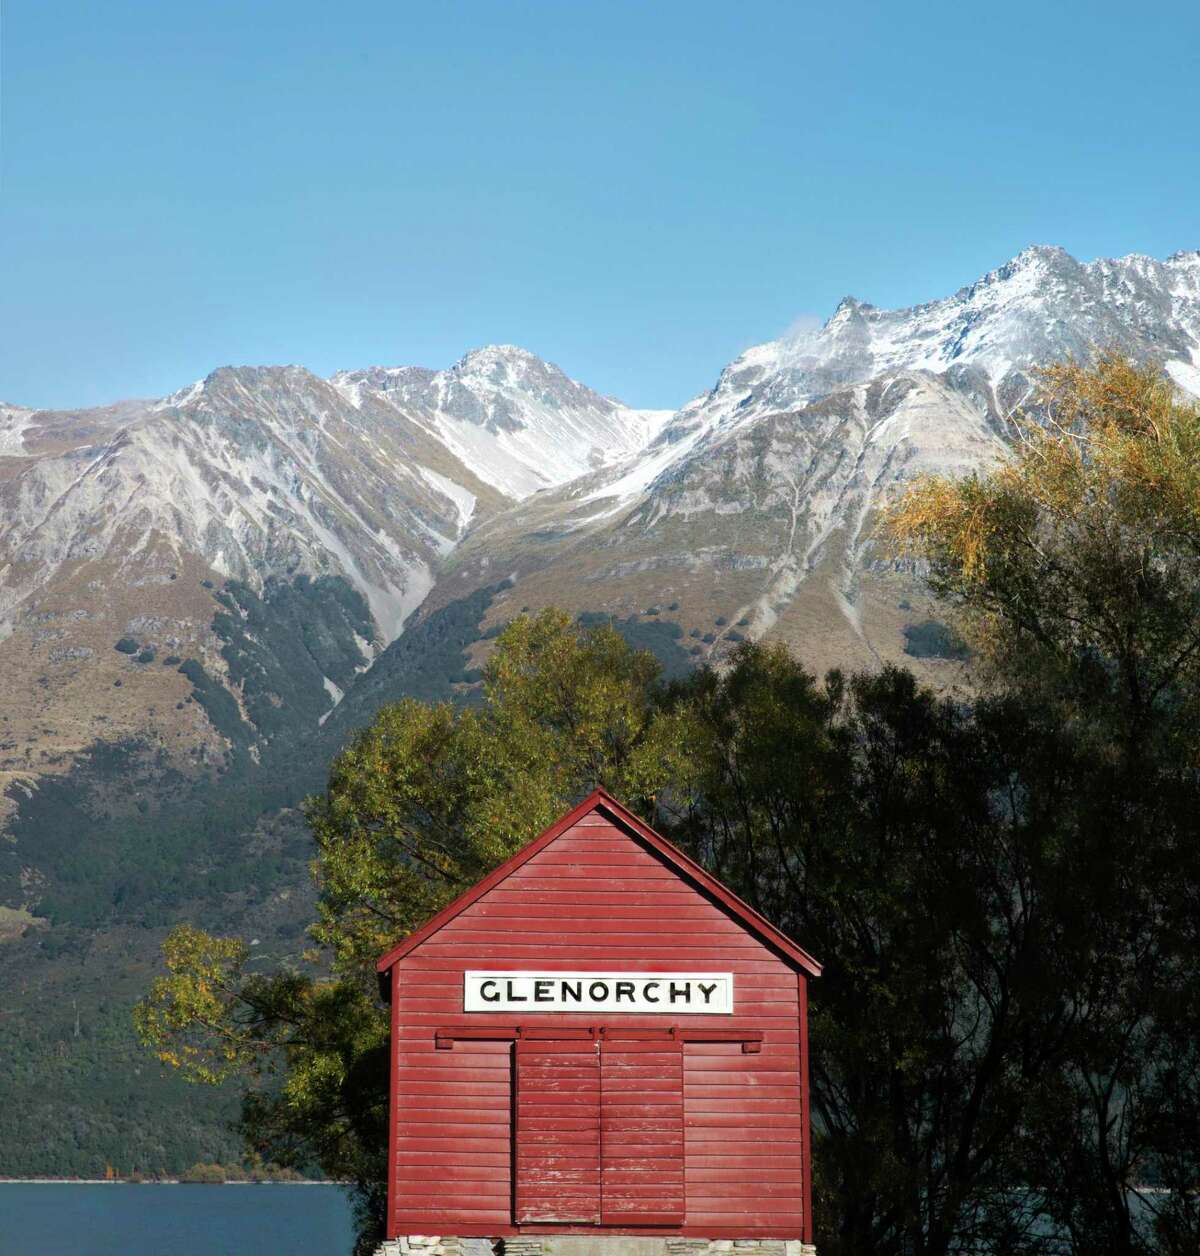 Wharf Shed in Glenorchy, New Zealand, photographed by Frida Berg for the book "Accidentally Wes Anderson" by Wally Koval with Amanda Koval